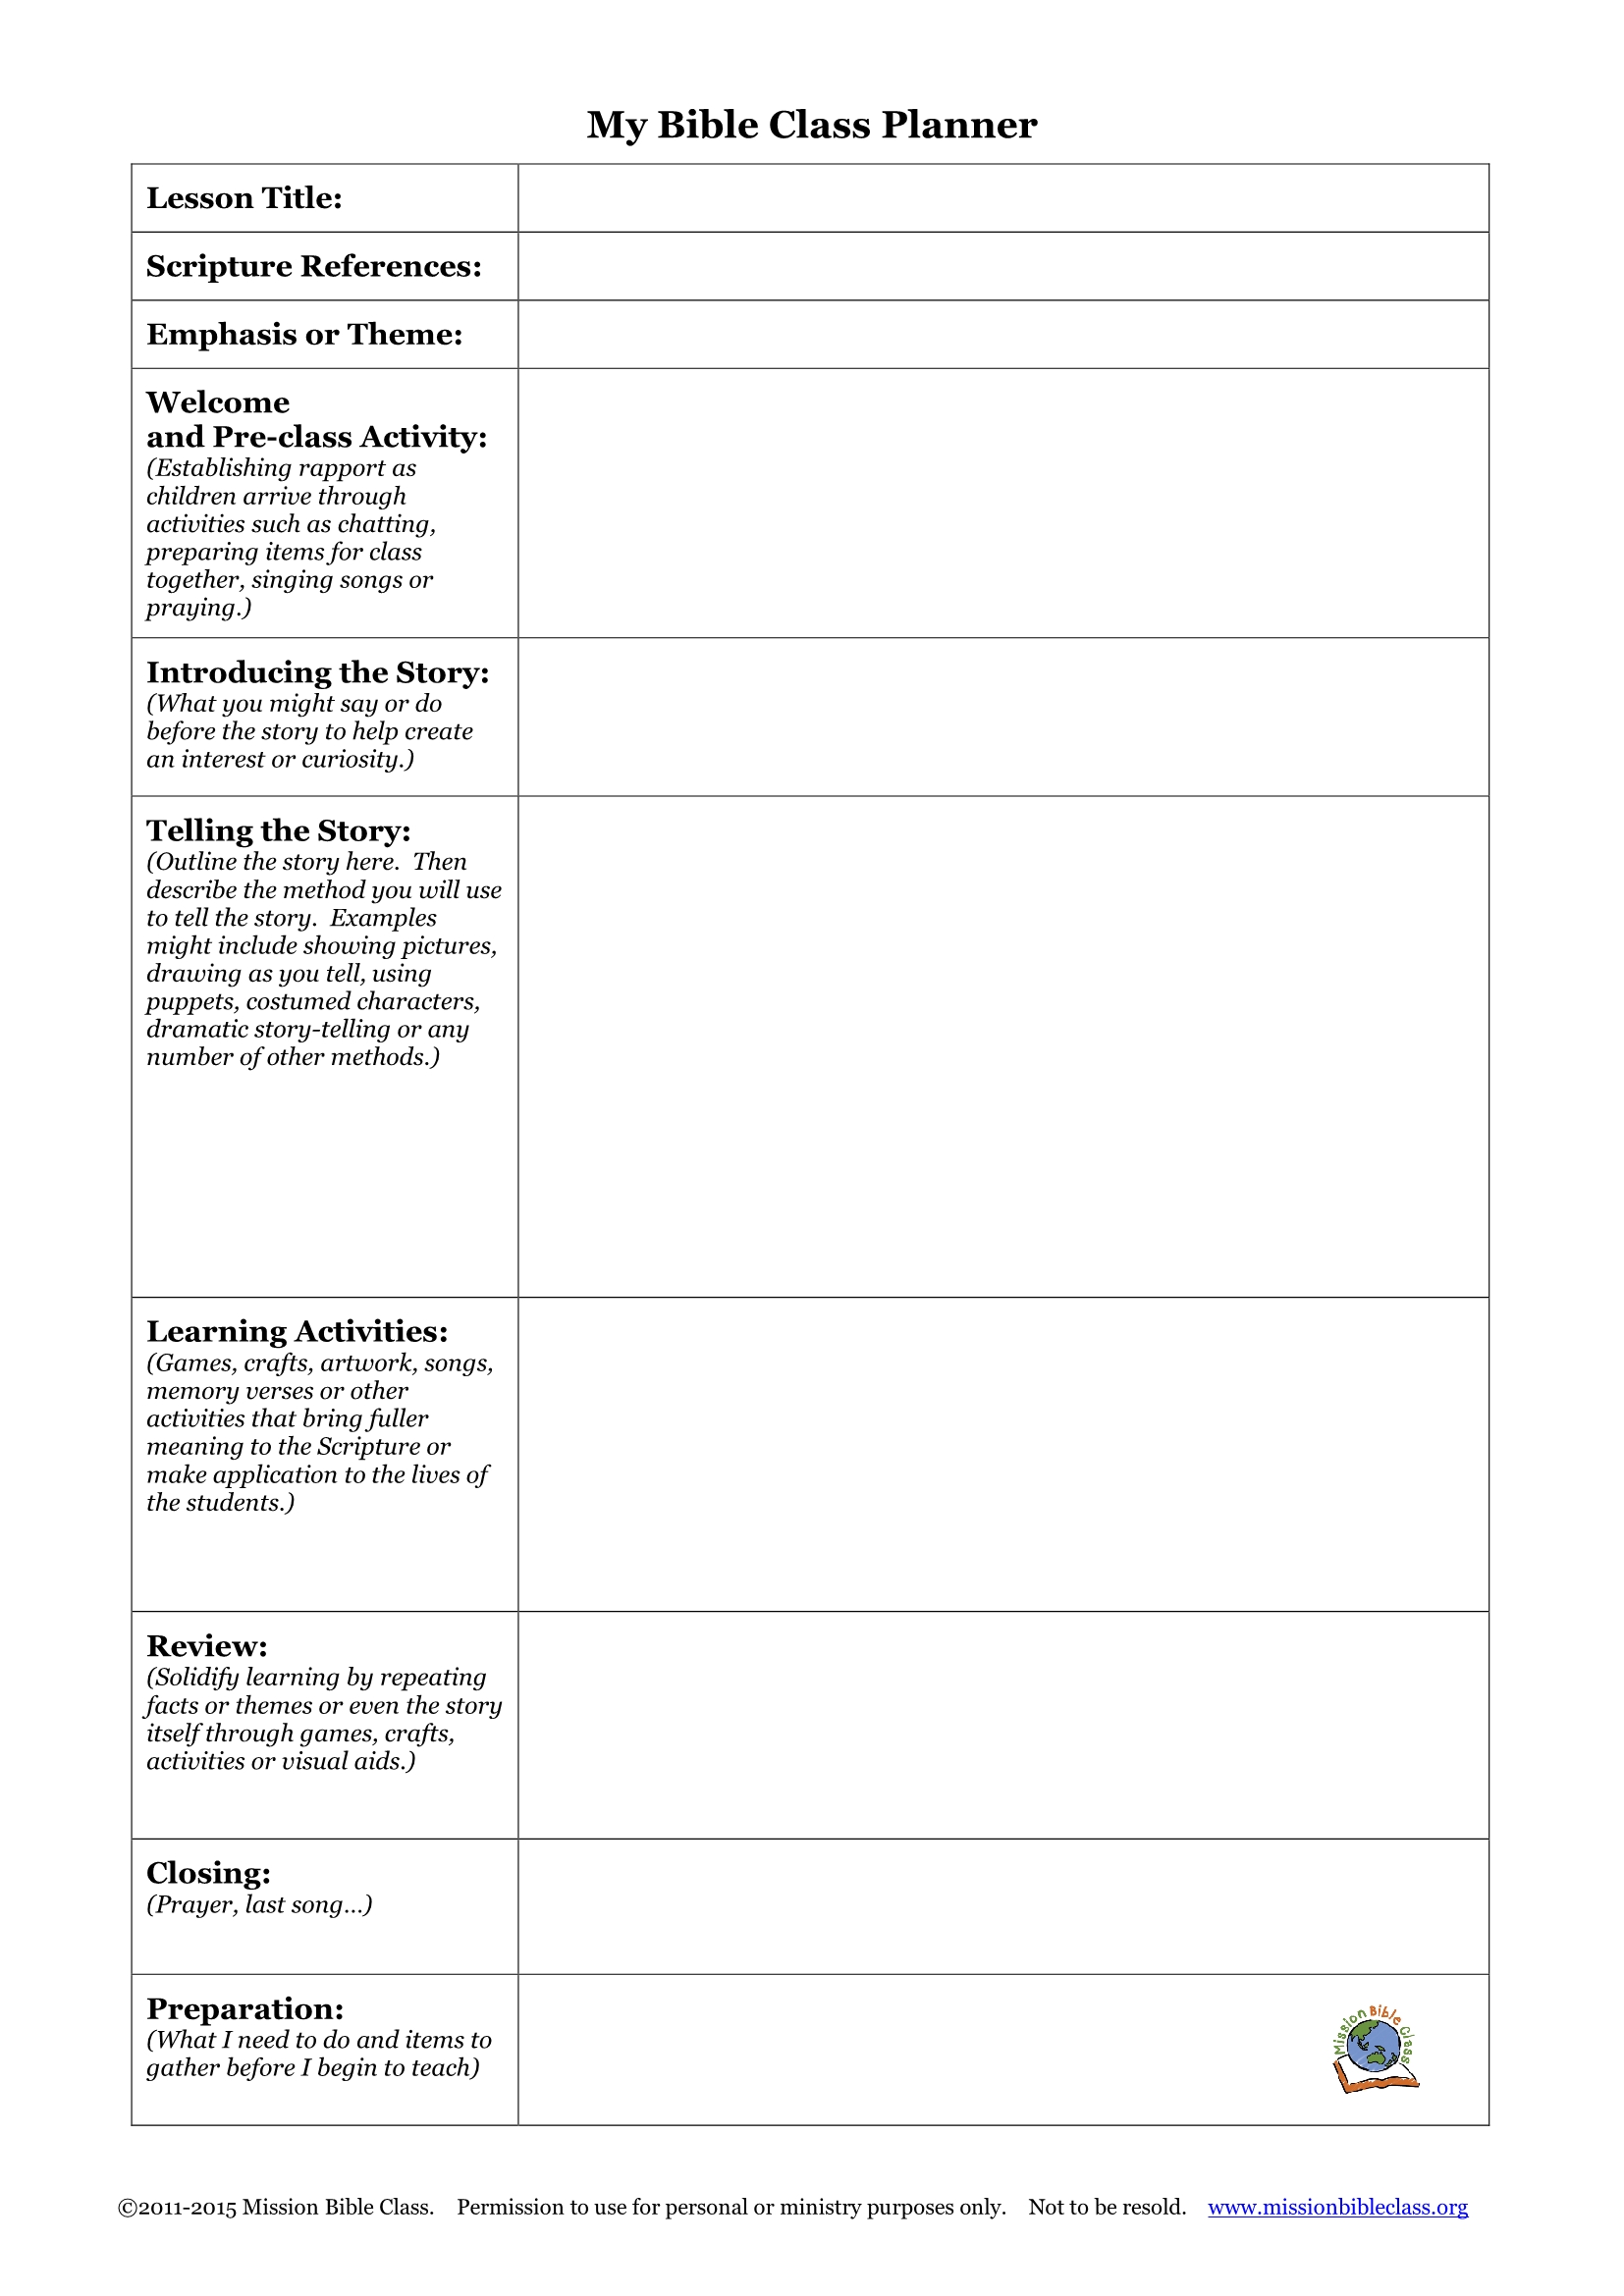 Blank Lesson Plan Templates To Print | Teaching The Bible To with regard to Template For Monthly Calendar Lesson Plans For Childrens Church